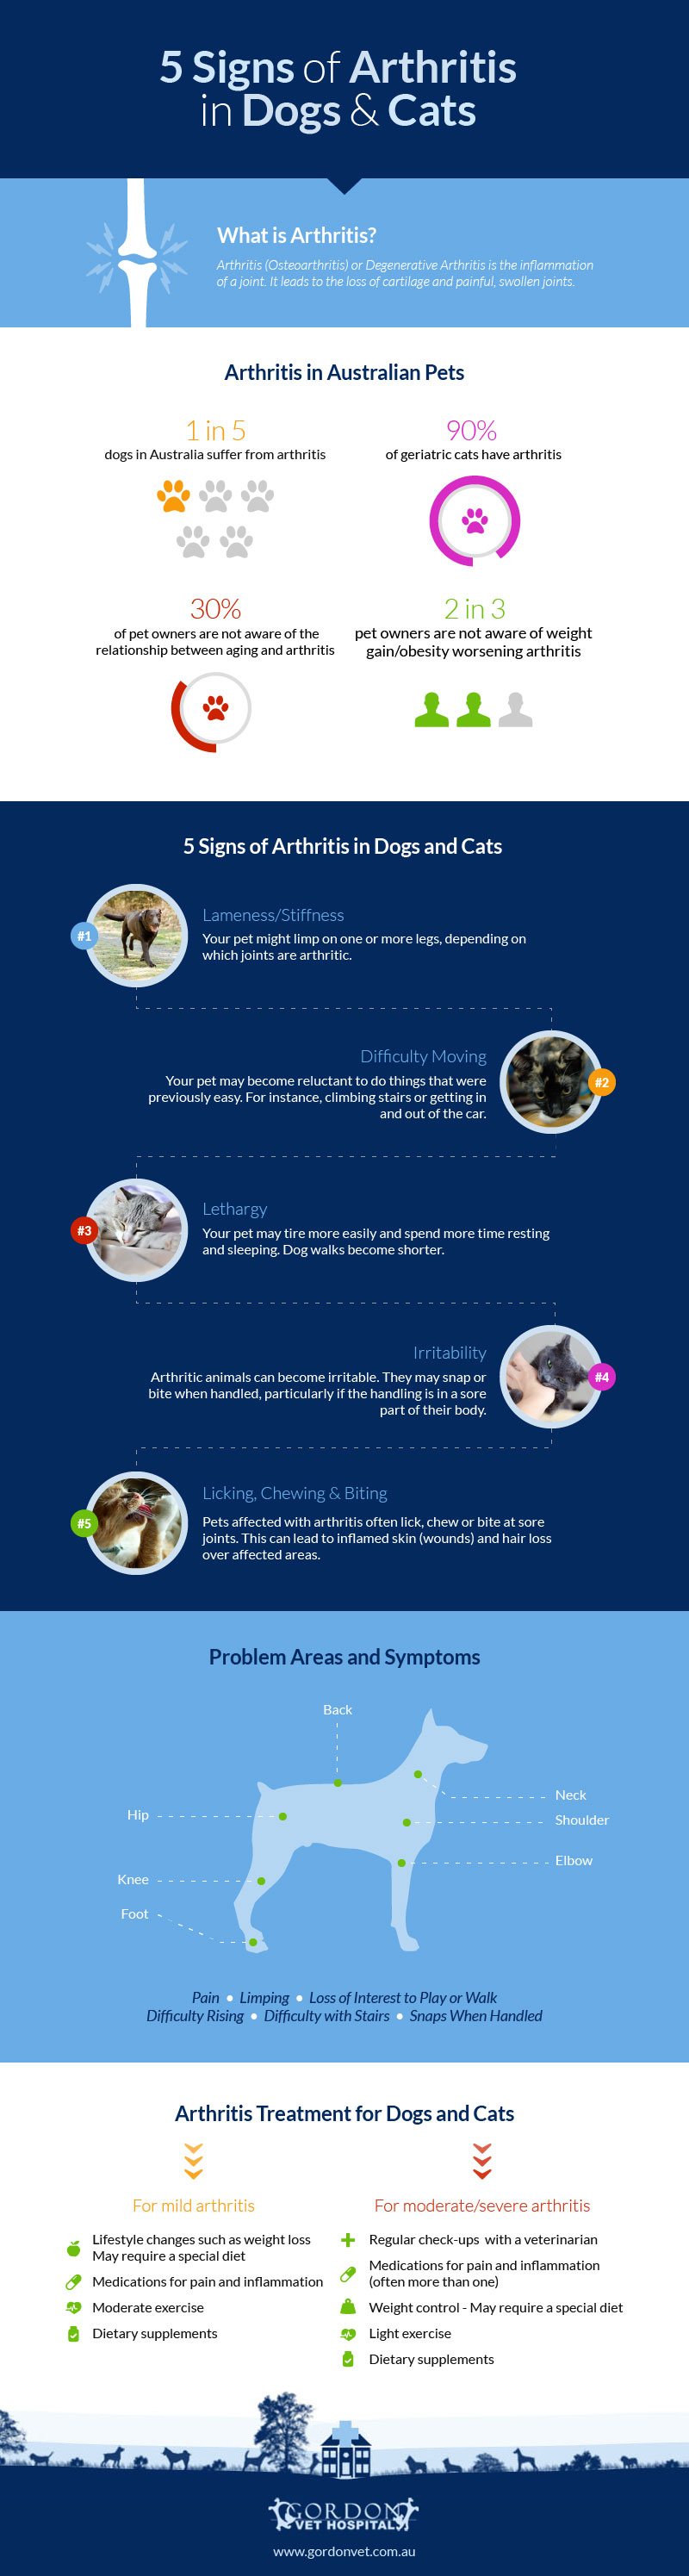 5-signs-arthritis-dogs-cats